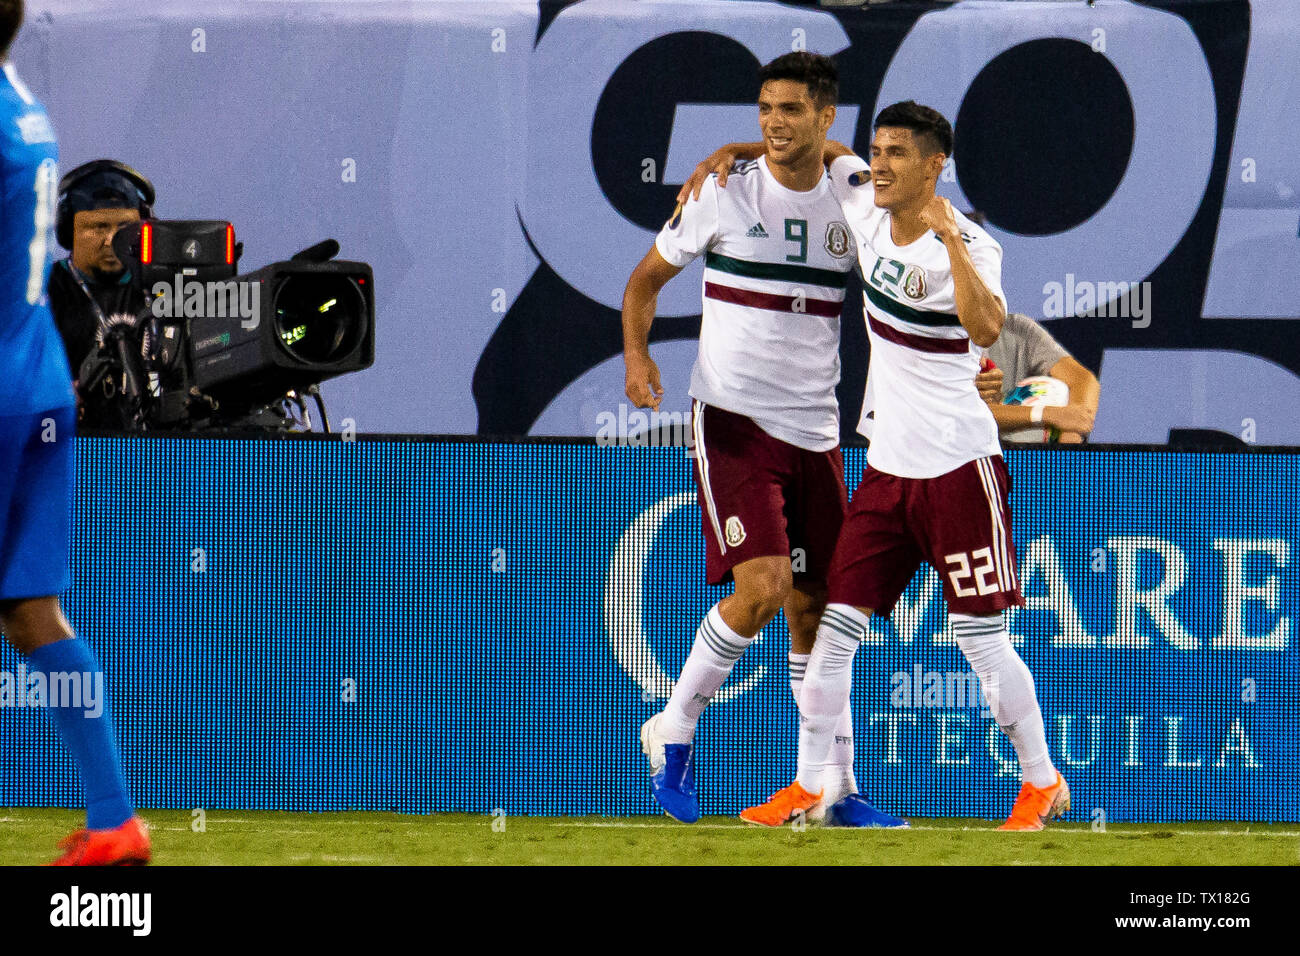 Charlotte, NC, USA. 23rd June, 2019. Mexico forward Raul Jimenez (9) celebrates with defender Jorge Sanchez (22) after scoring in the 2019 Gold Cup match at Bank of America Stadium in Charlotte, NC. (Scott Kinser) Credit: csm/Alamy Live News Stock Photo